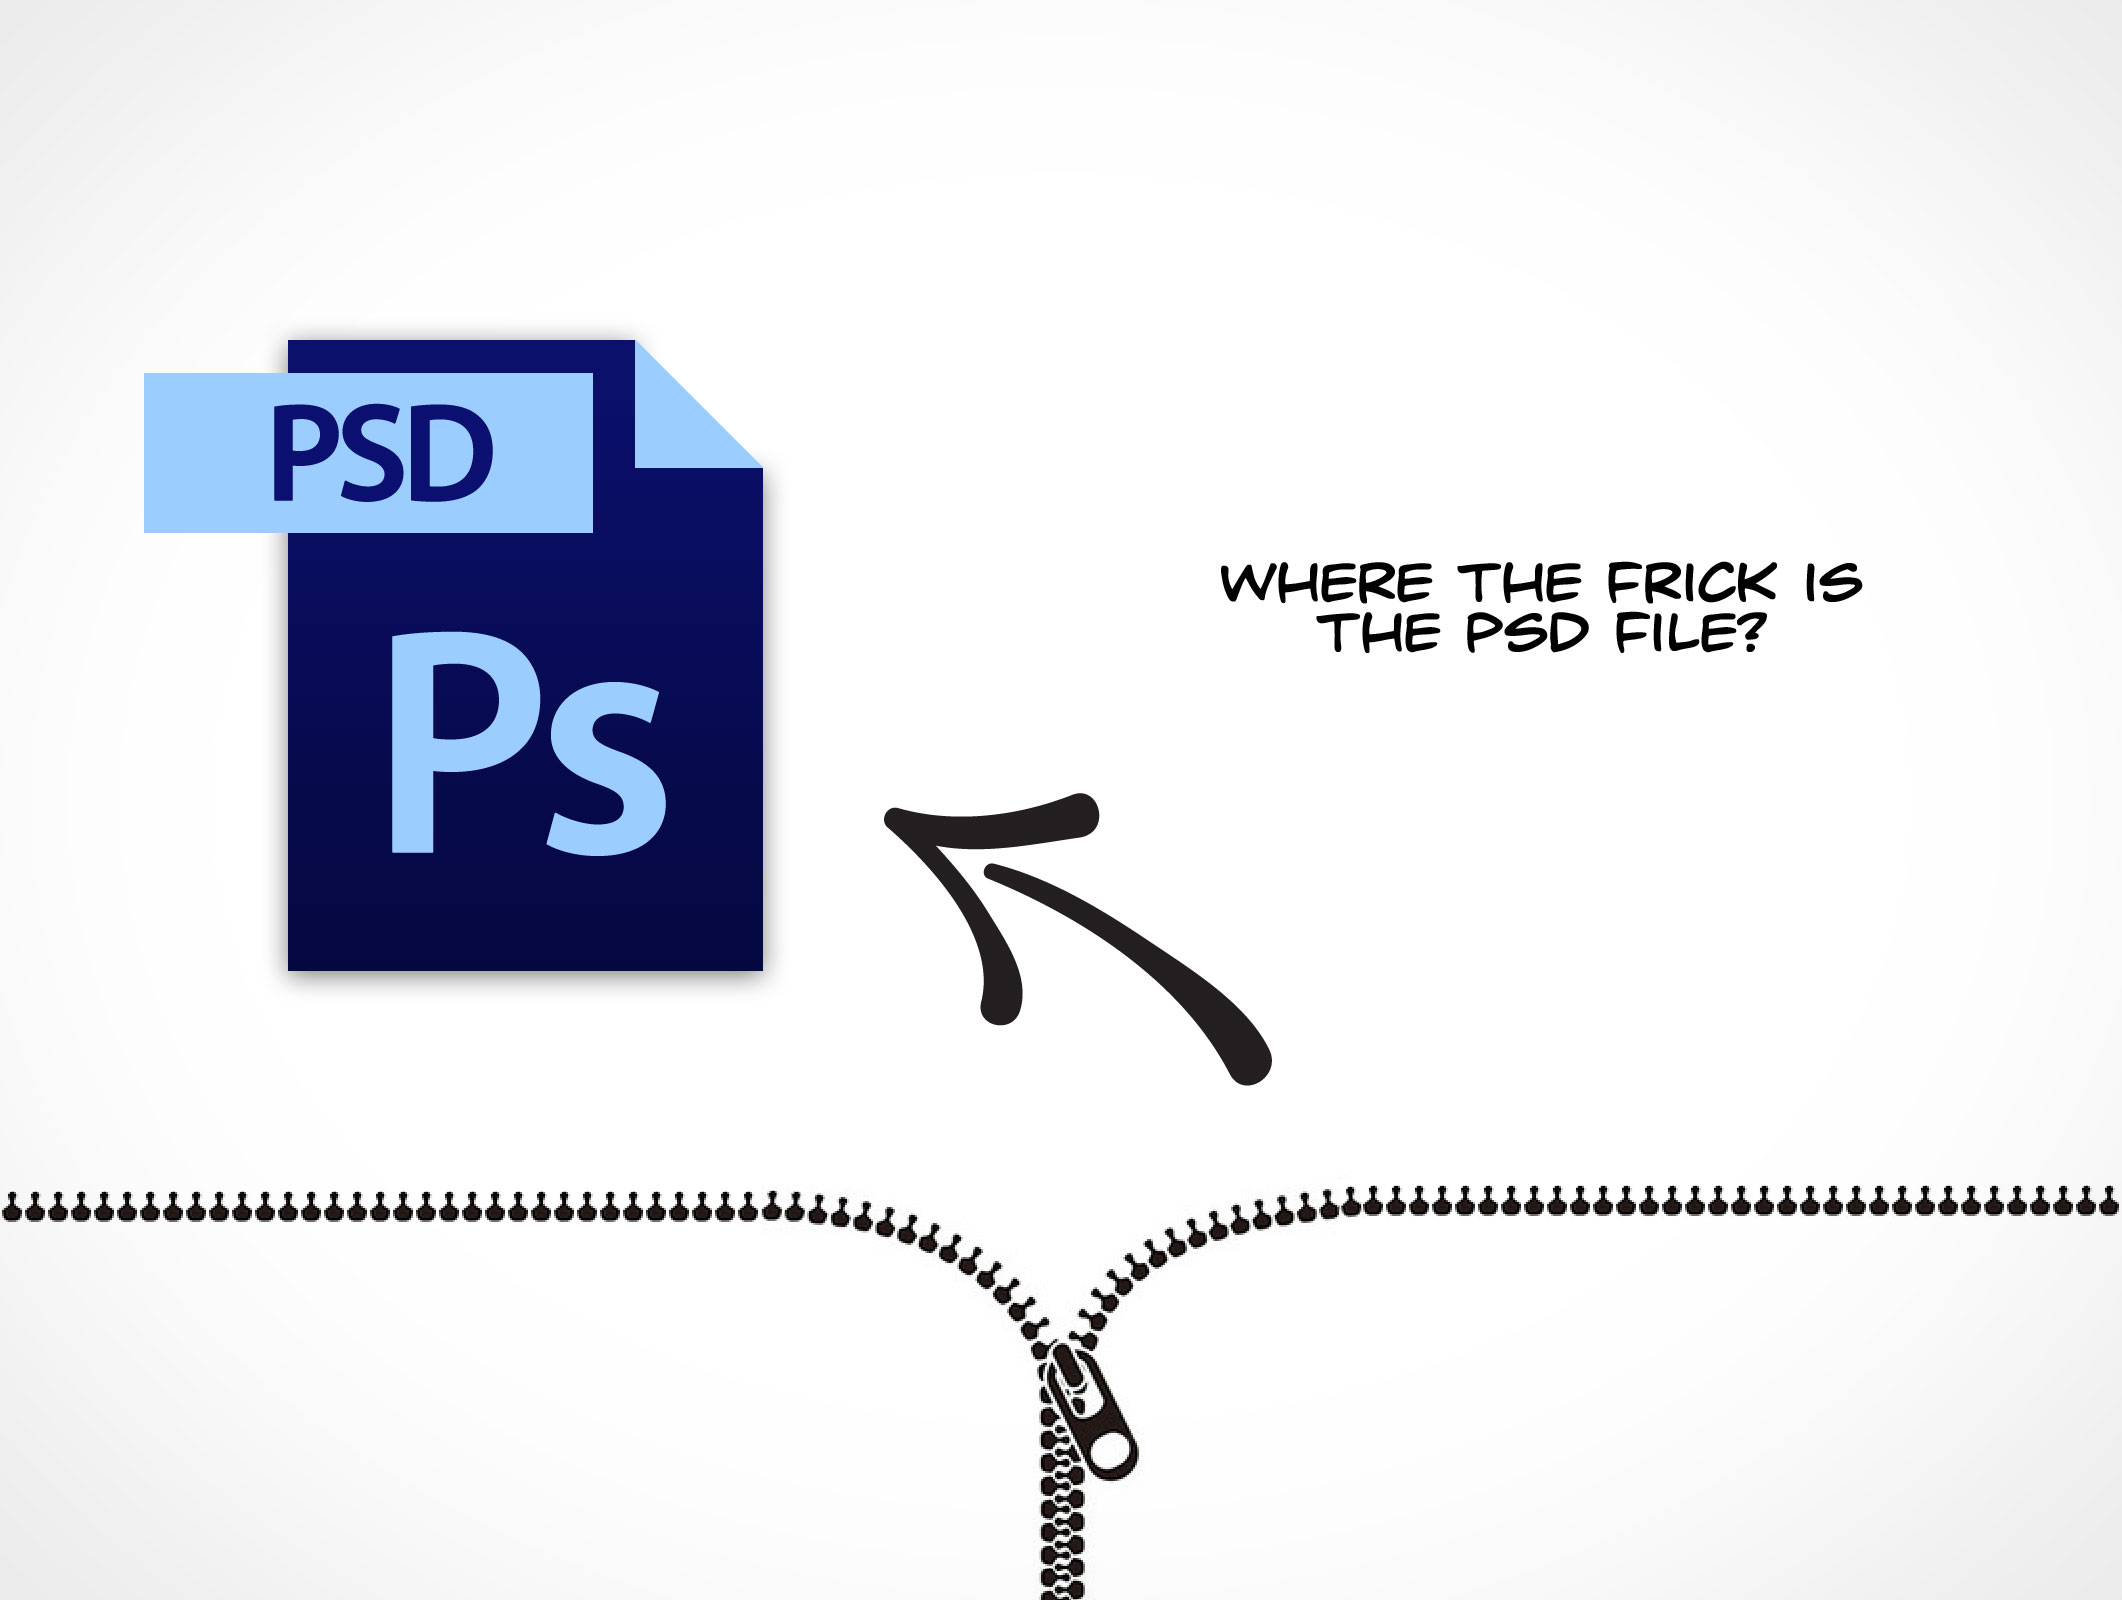 Where the frick is the PSD